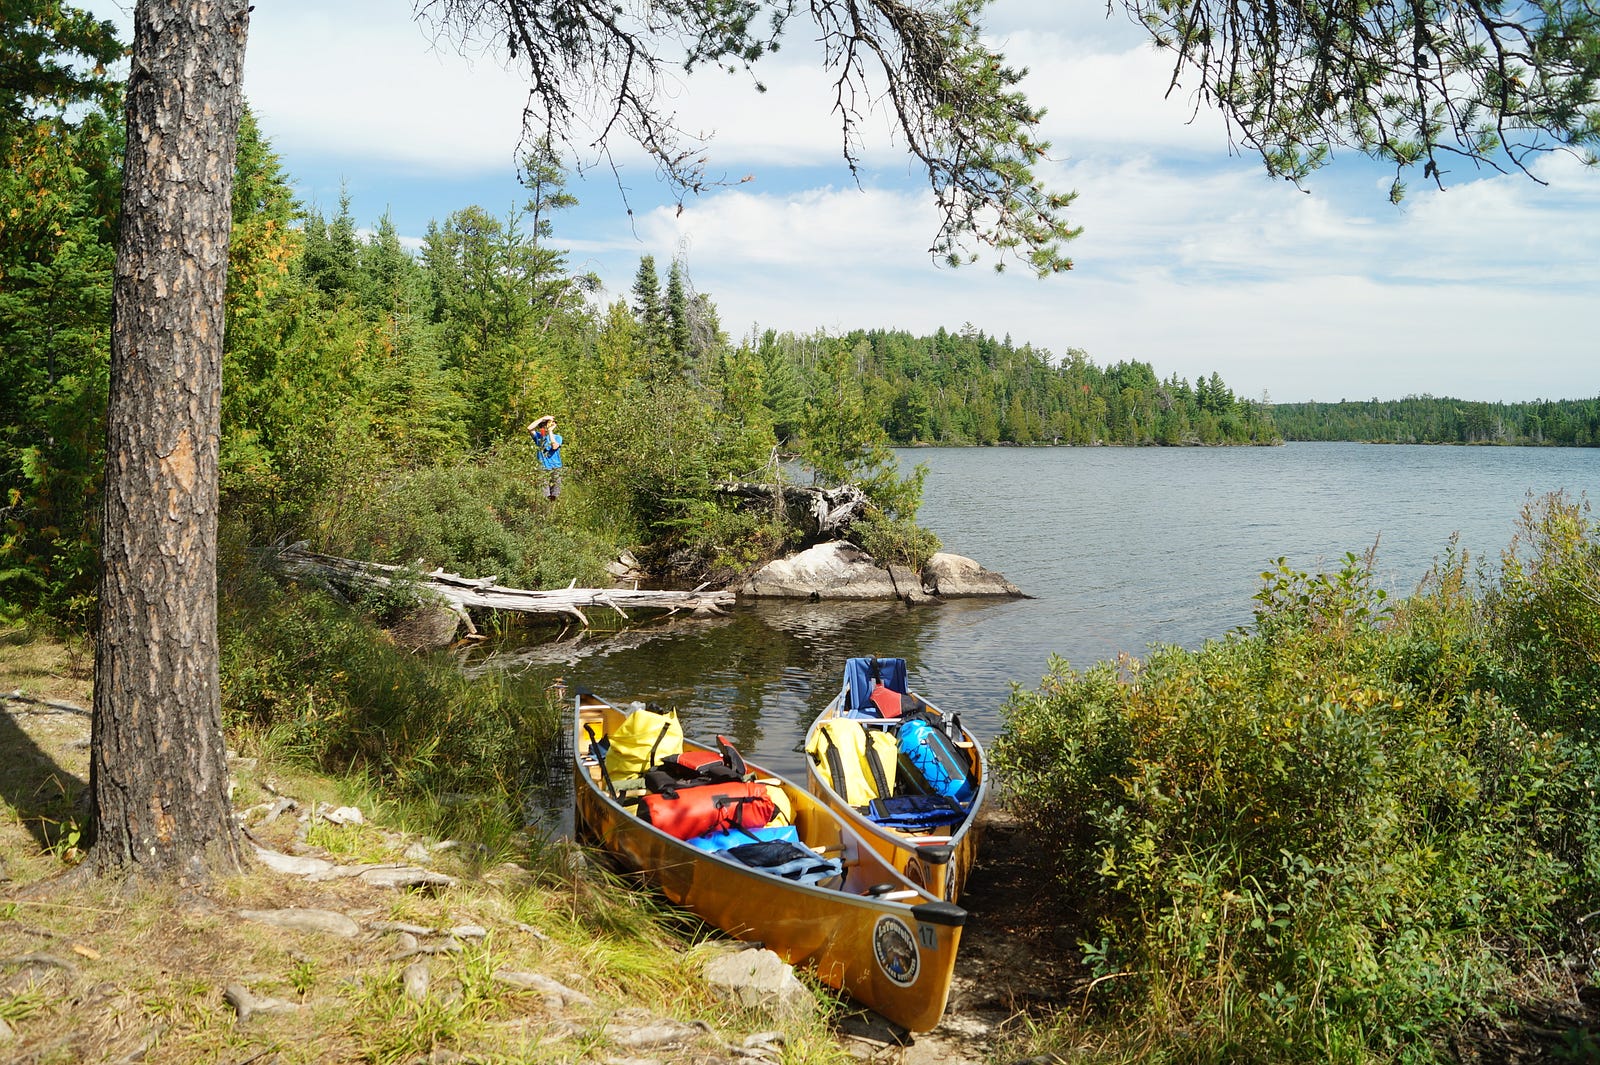 Two canoes with gear inside, on the edge of a waterway.